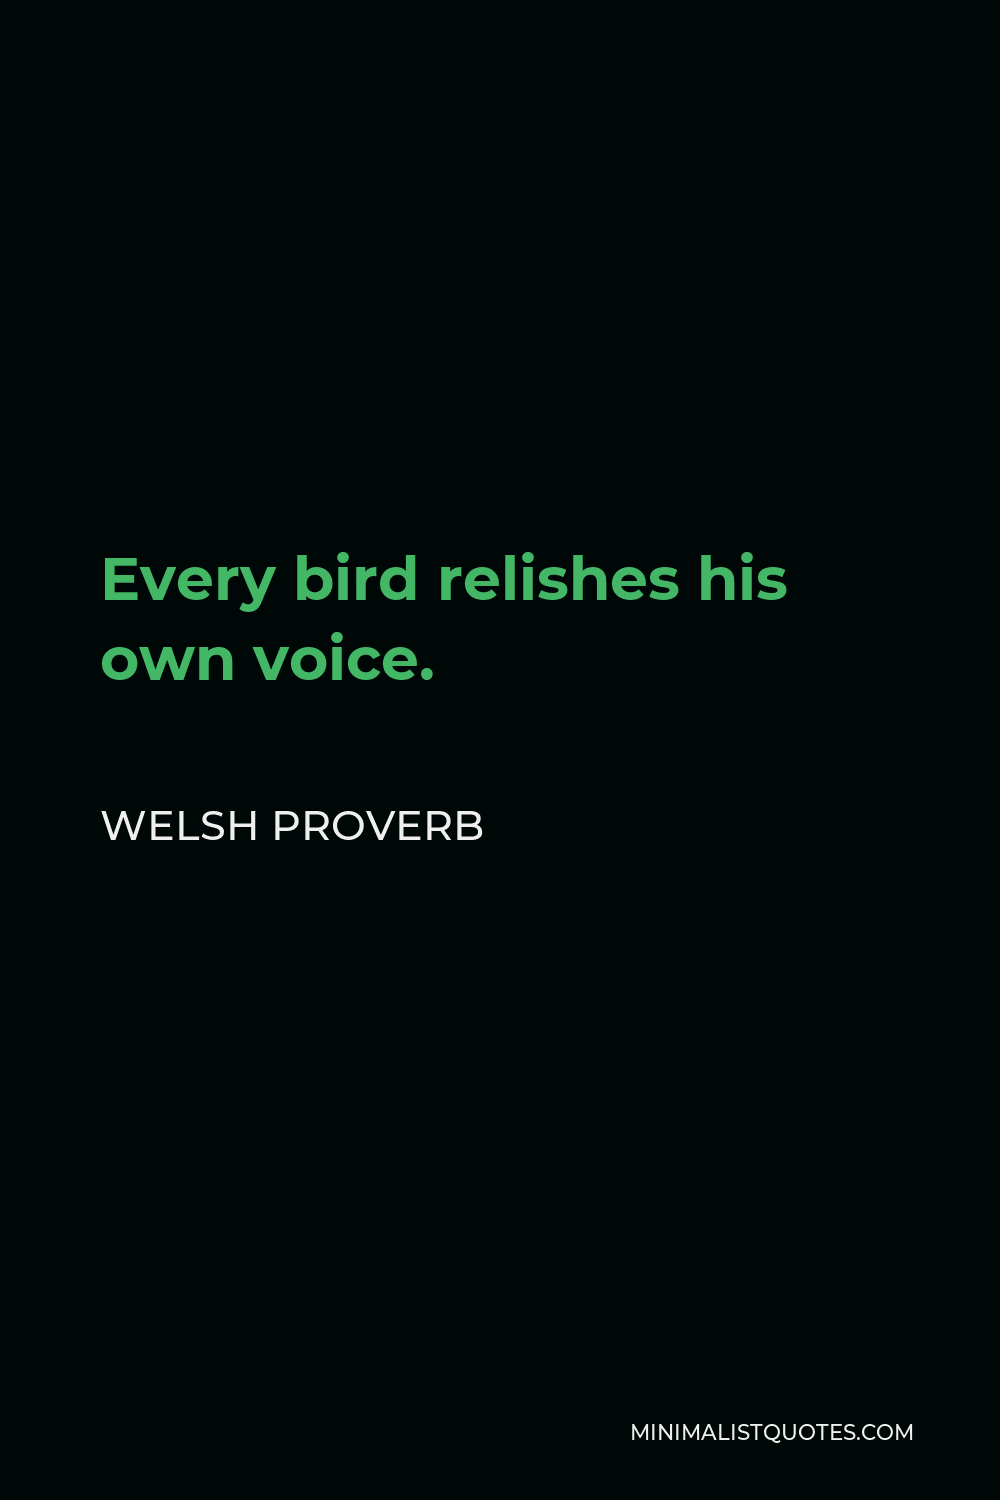 Welsh Proverb Quote - Every bird relishes his own voice.